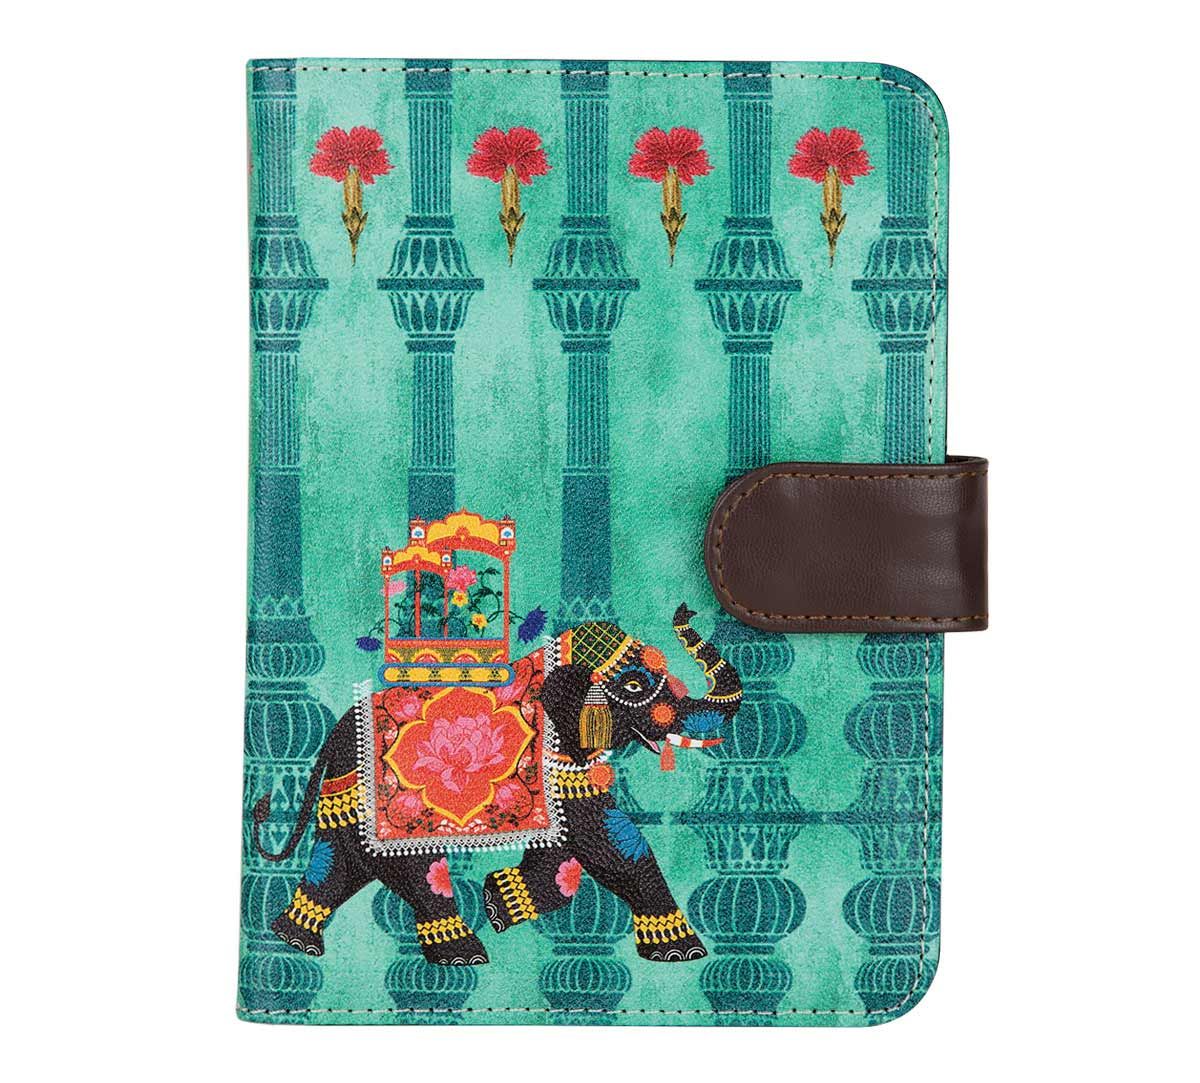 India Circus Tusker Chariot Passport Cover